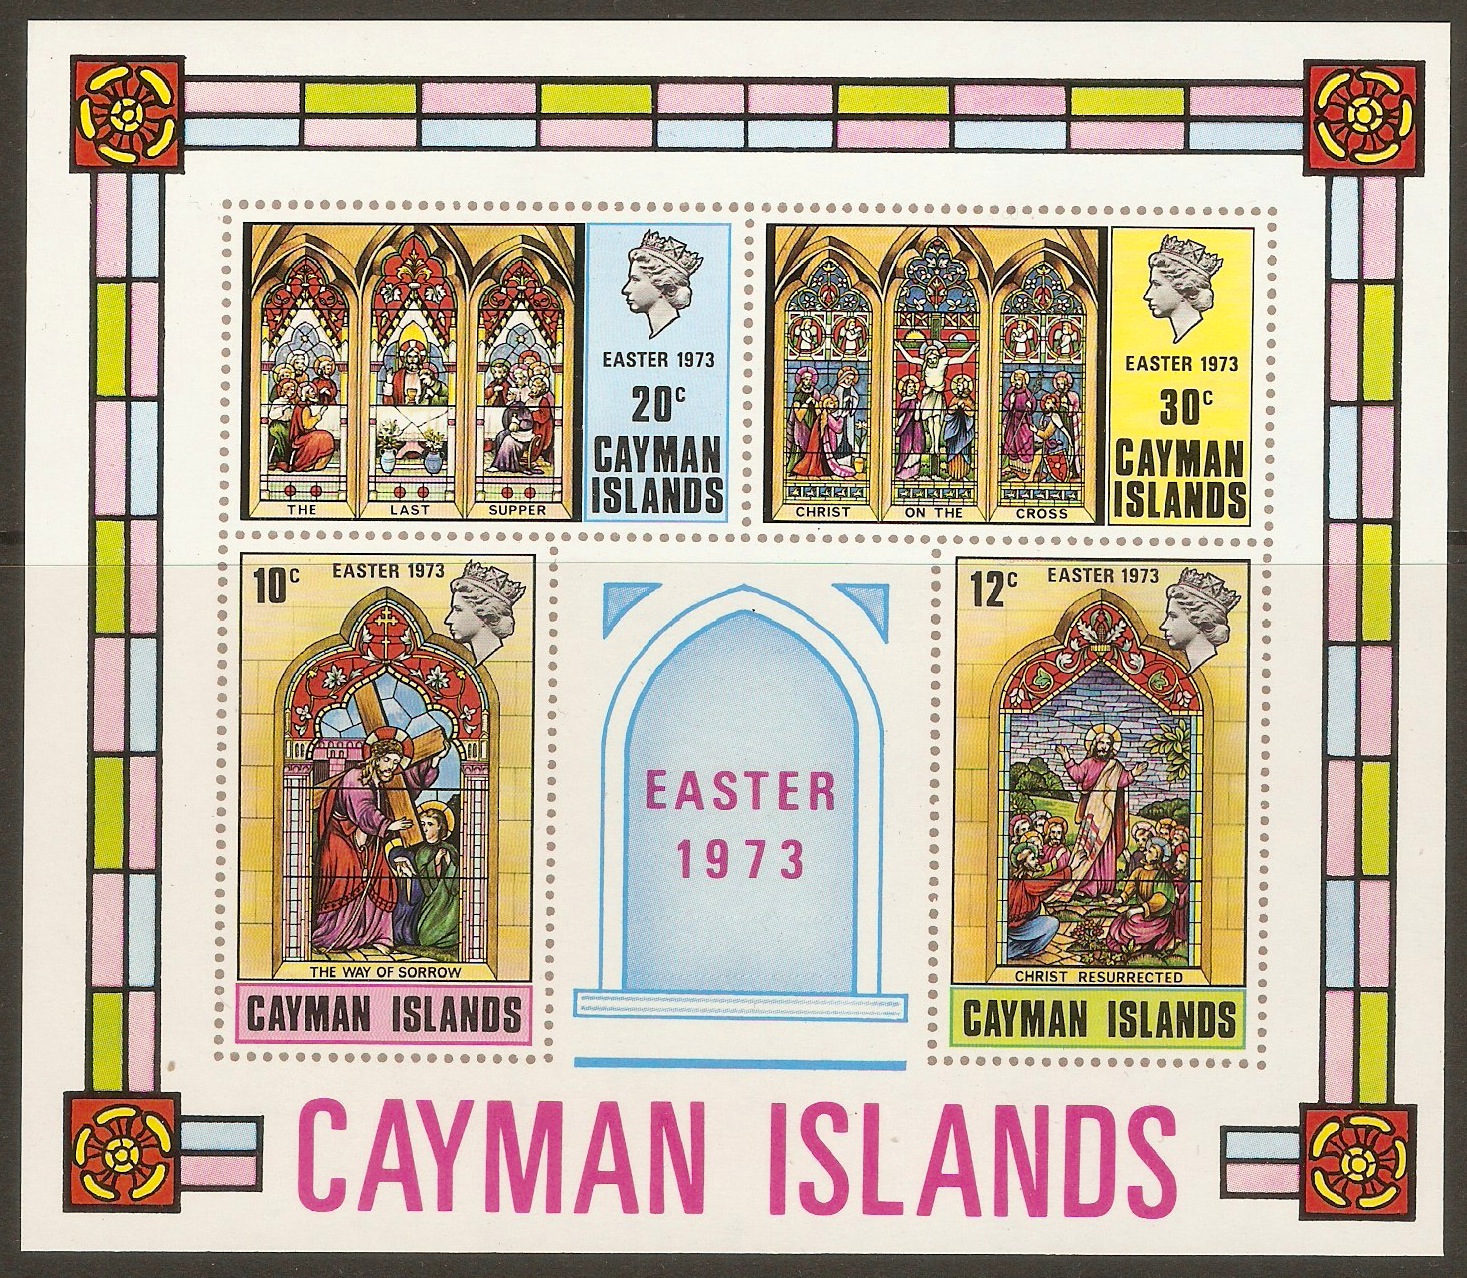 Cayman Islands 1973 Easter Stained Glass sheet. SGMS328.